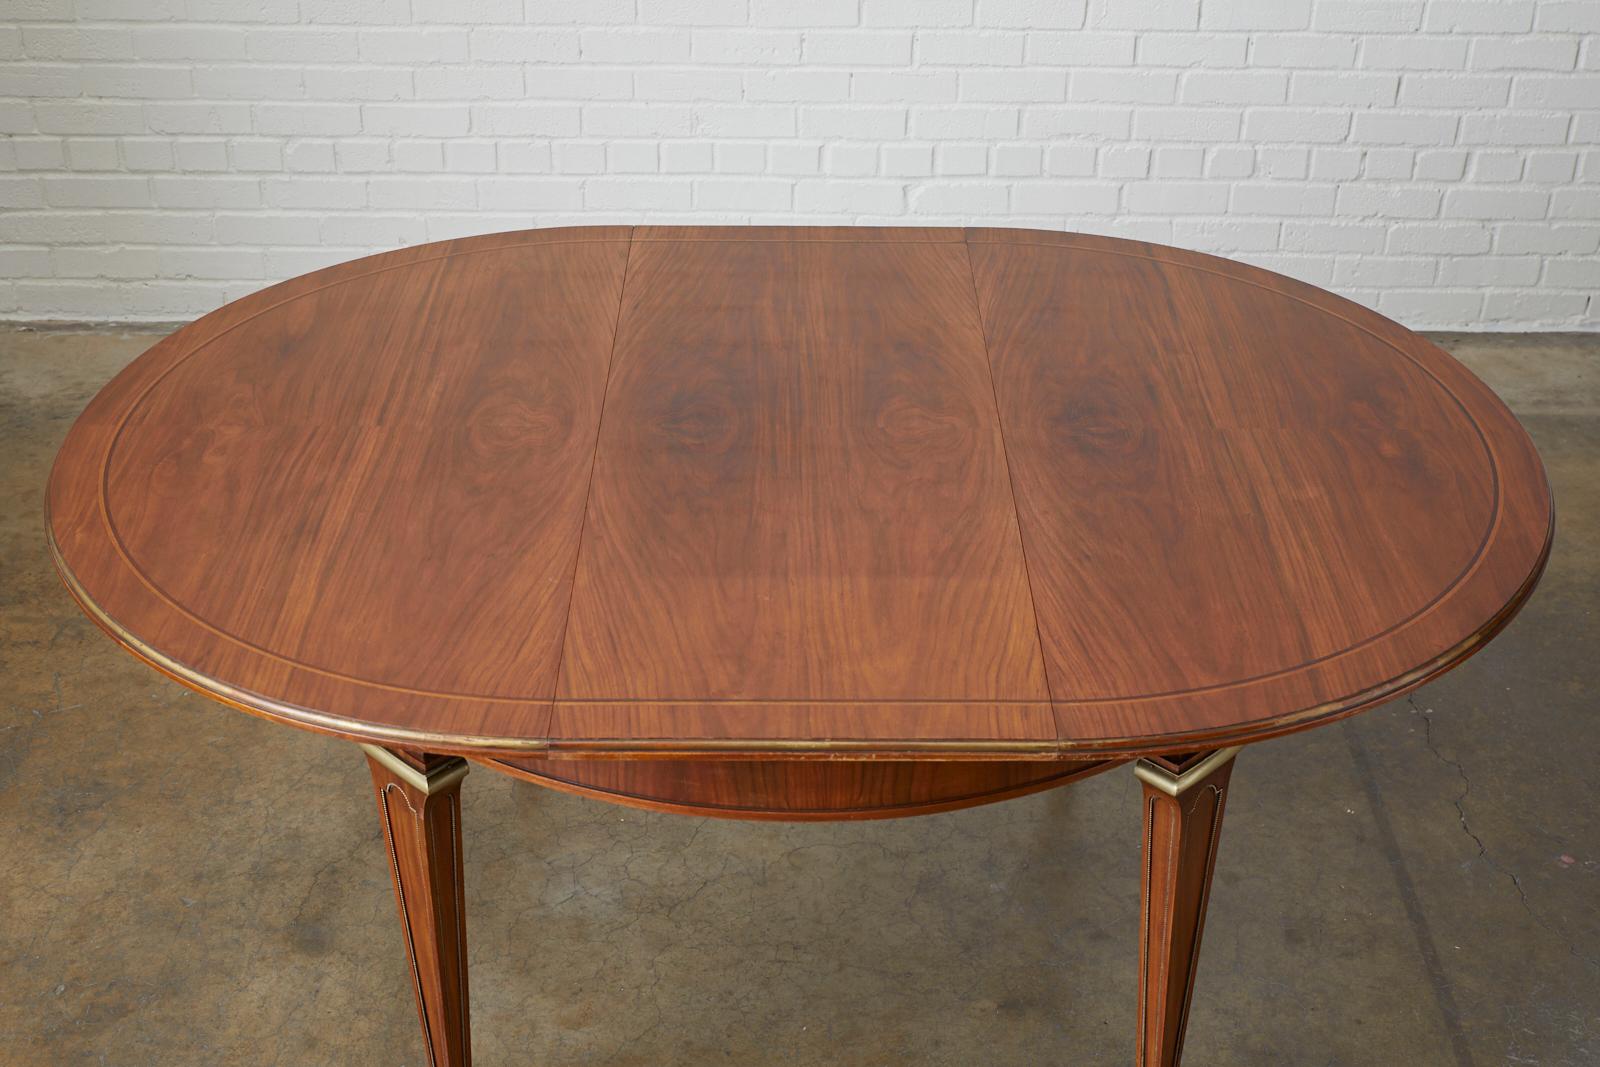 French Maison Jansen Round Mahogany Dining Table with Leaf